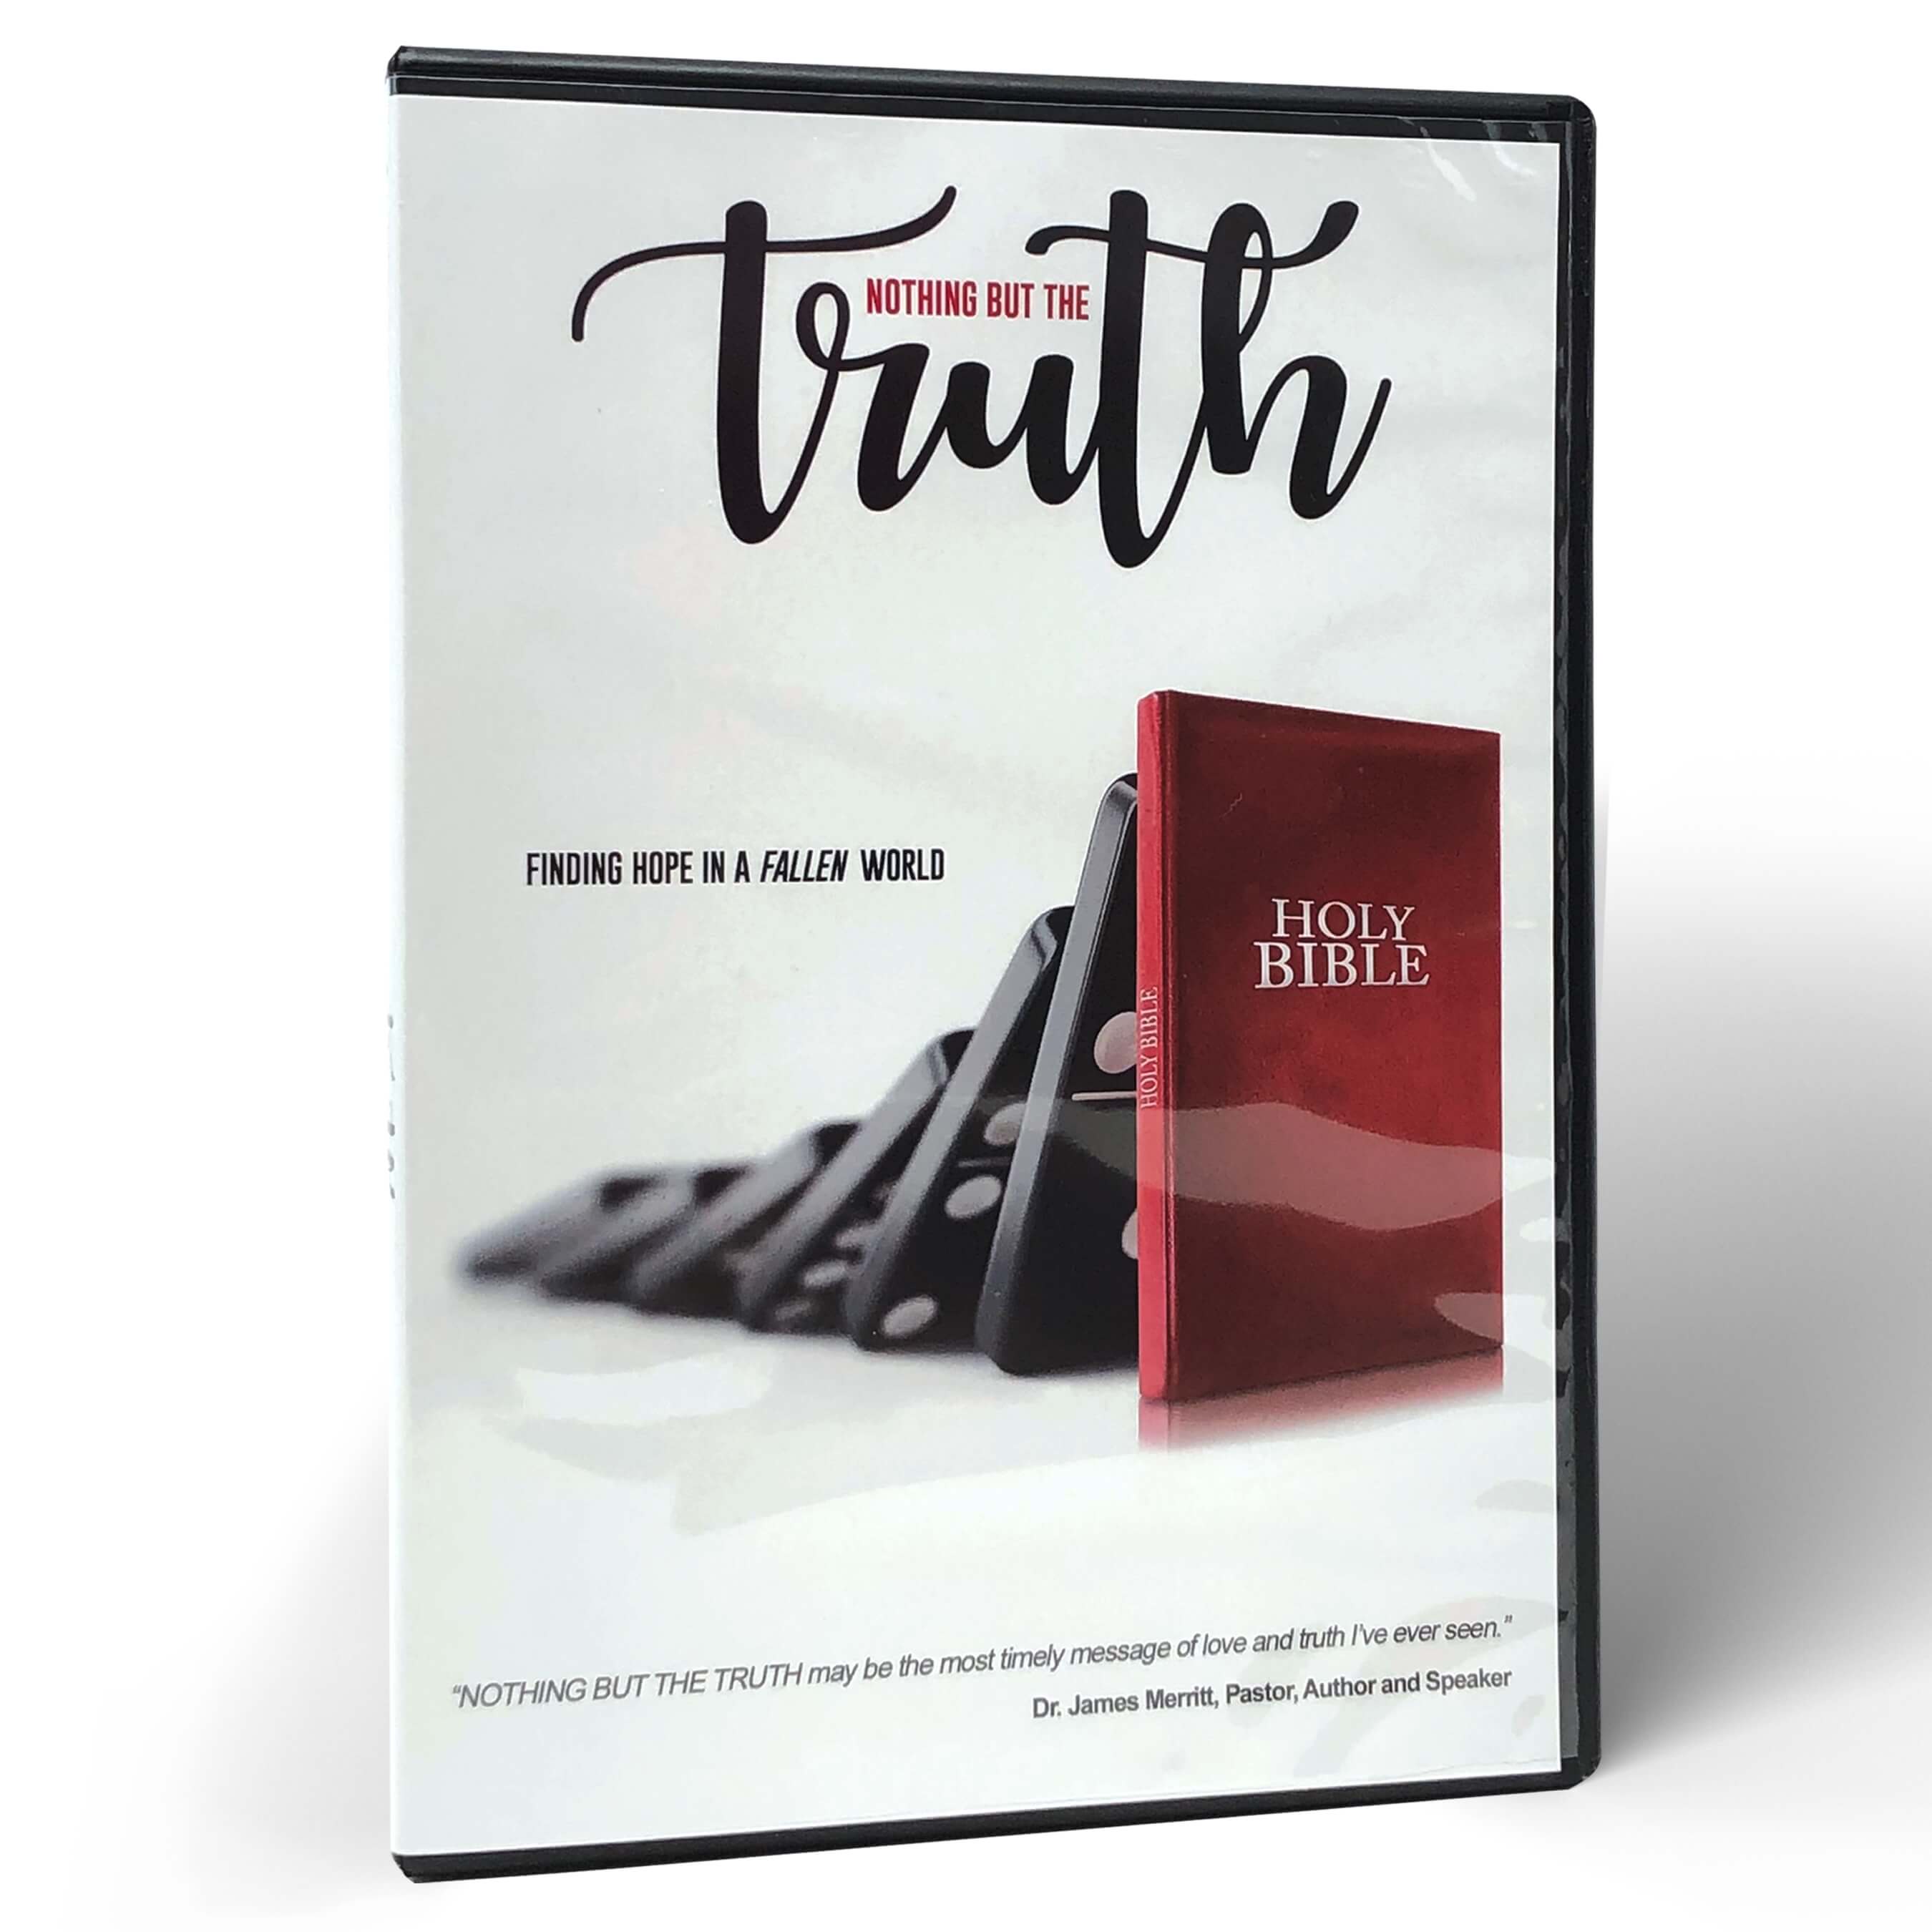 NOTHING BUT THE TRUTH DVD